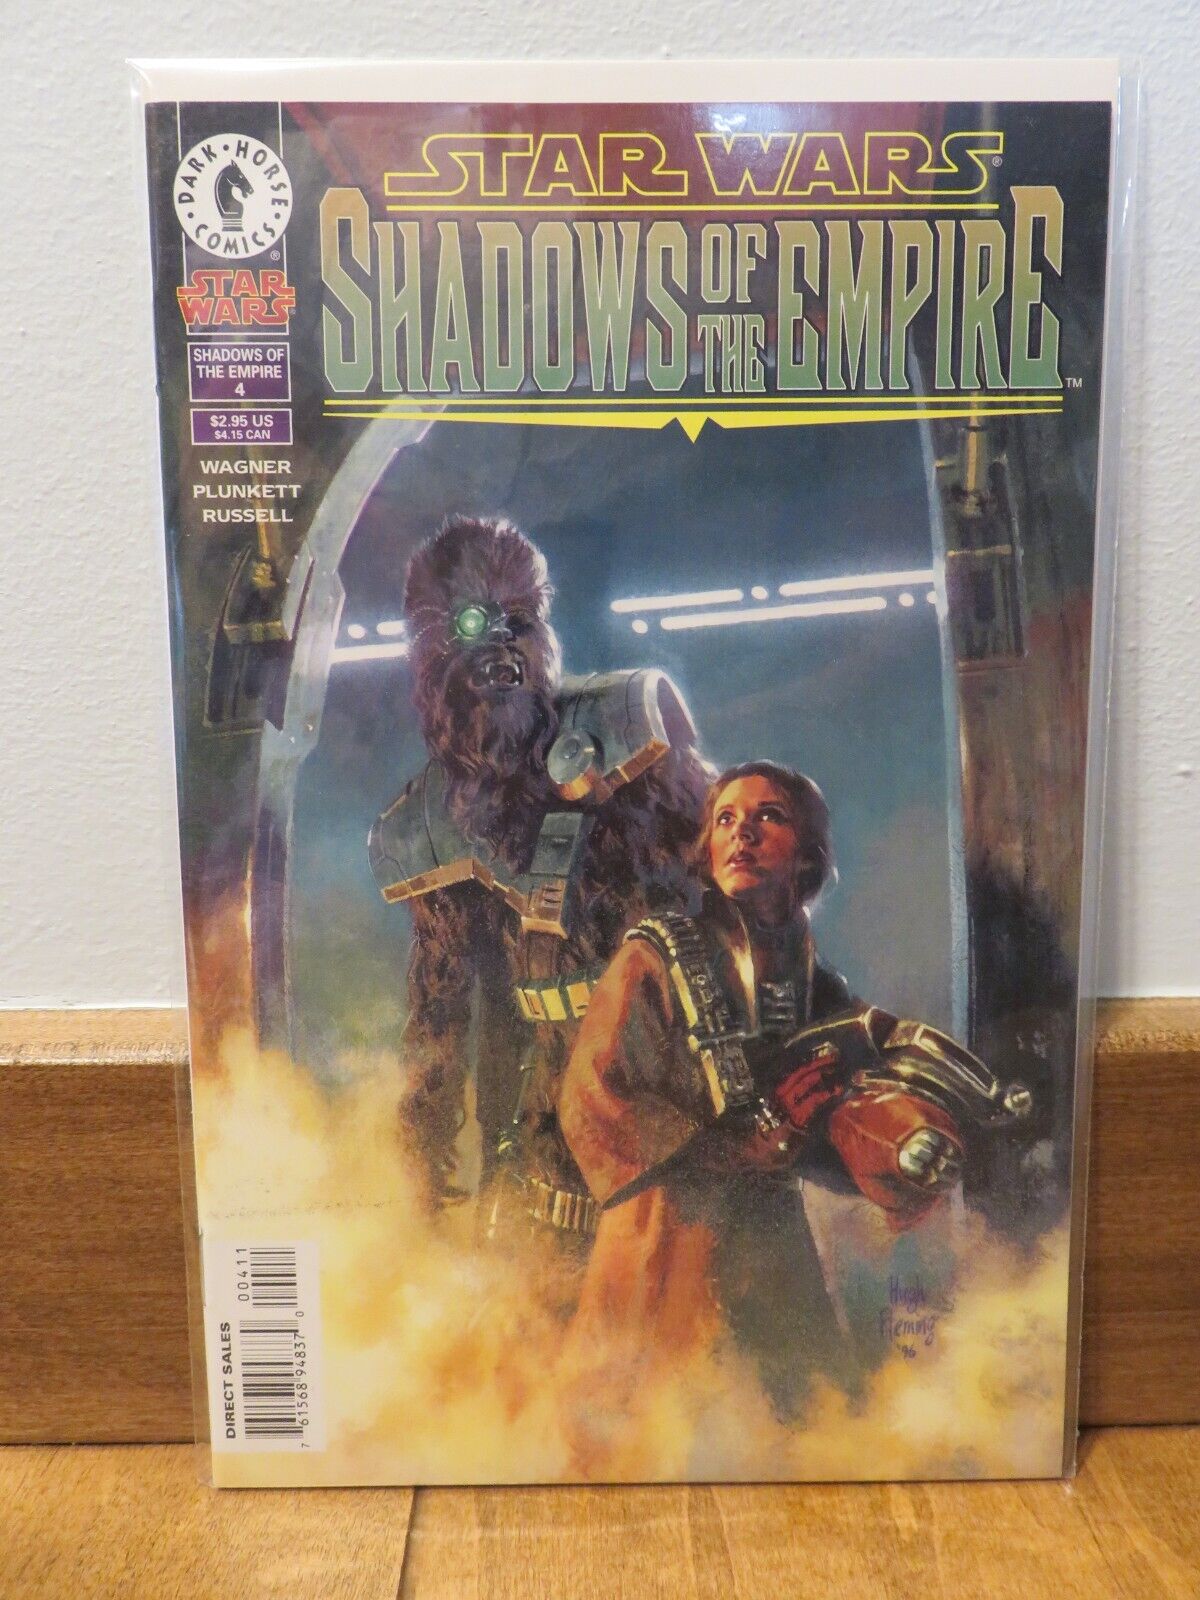 Star Wars: Shadows of the Empire #4 by Dark Horse Comics, Aug 1996